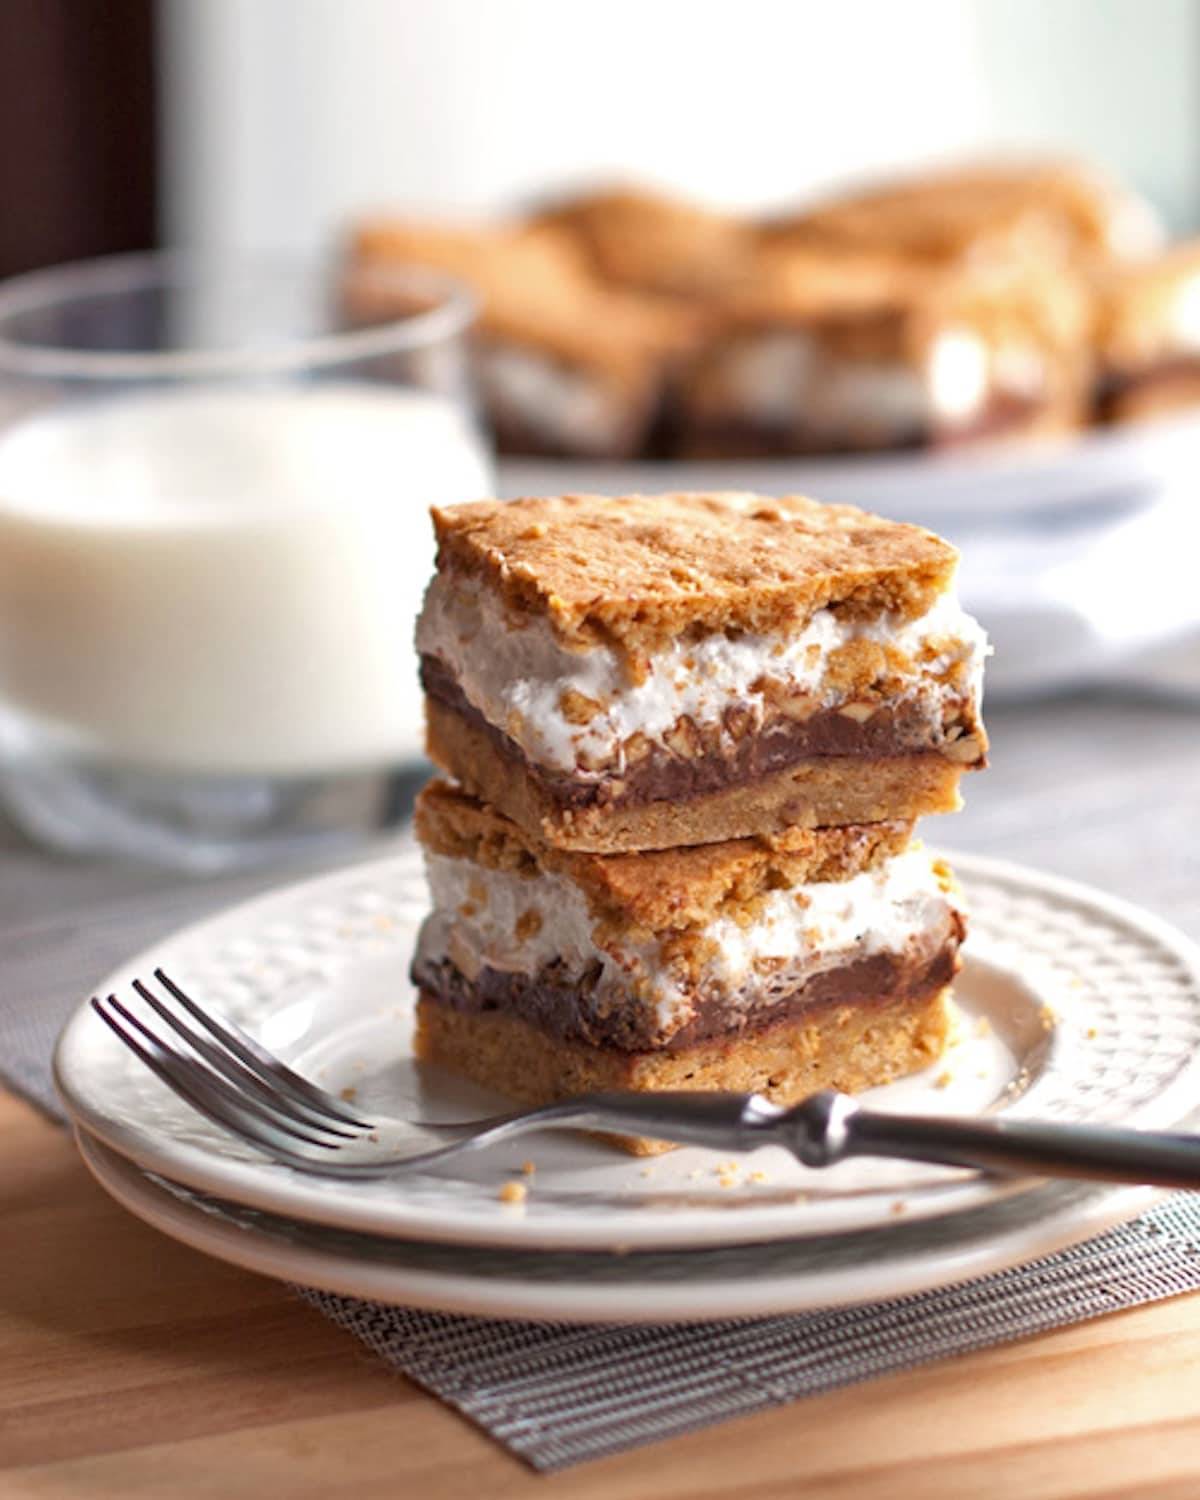 These s'mores bars have peanut butter layered in between marshmallow fluff, chocolate, and a graham cookie base. Just like s'mores! | pinchofyum.com